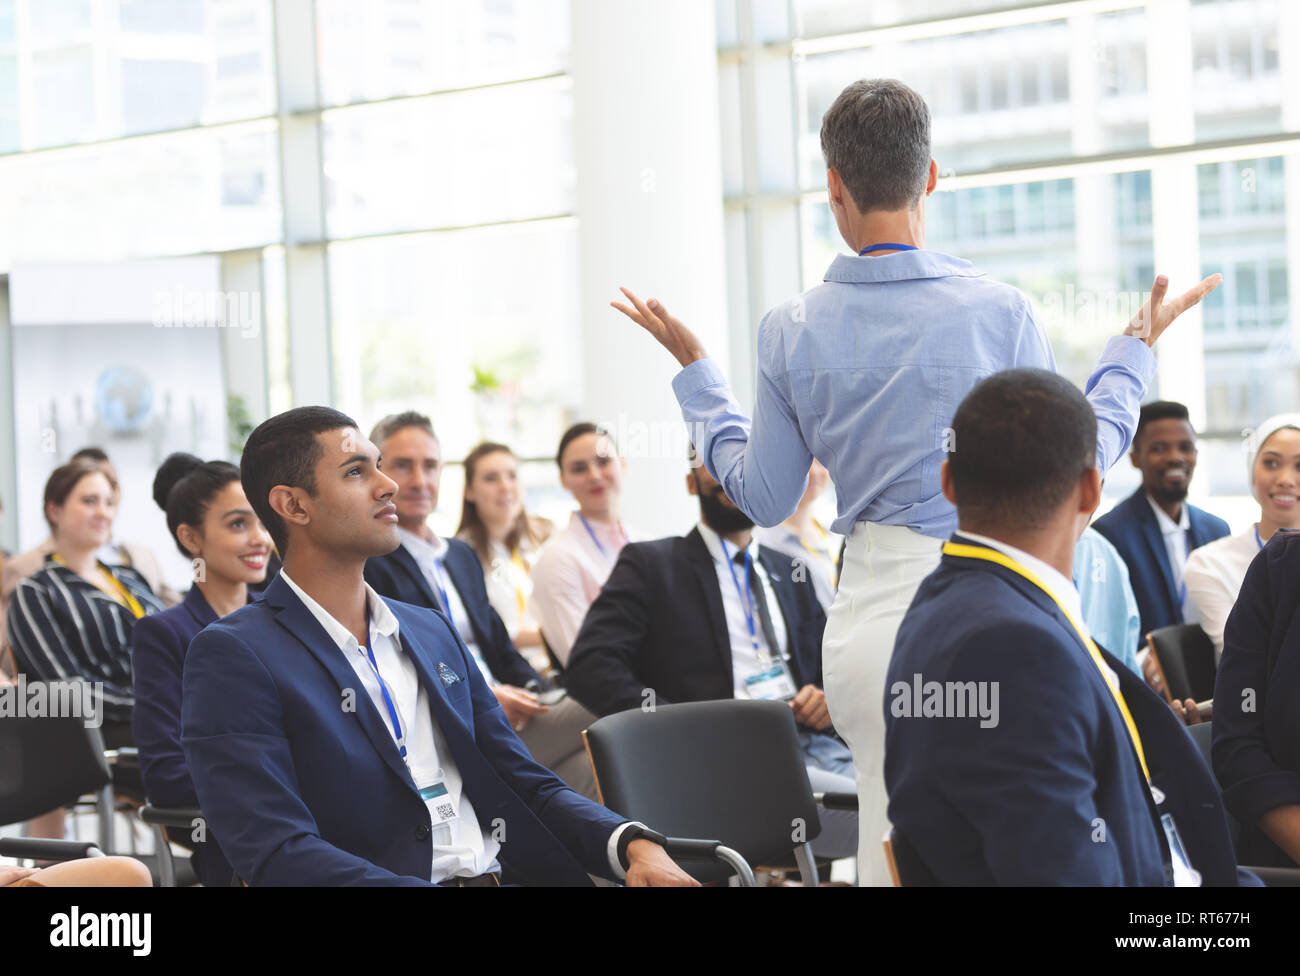 Businesswoman asking question during seminar Stock Photo